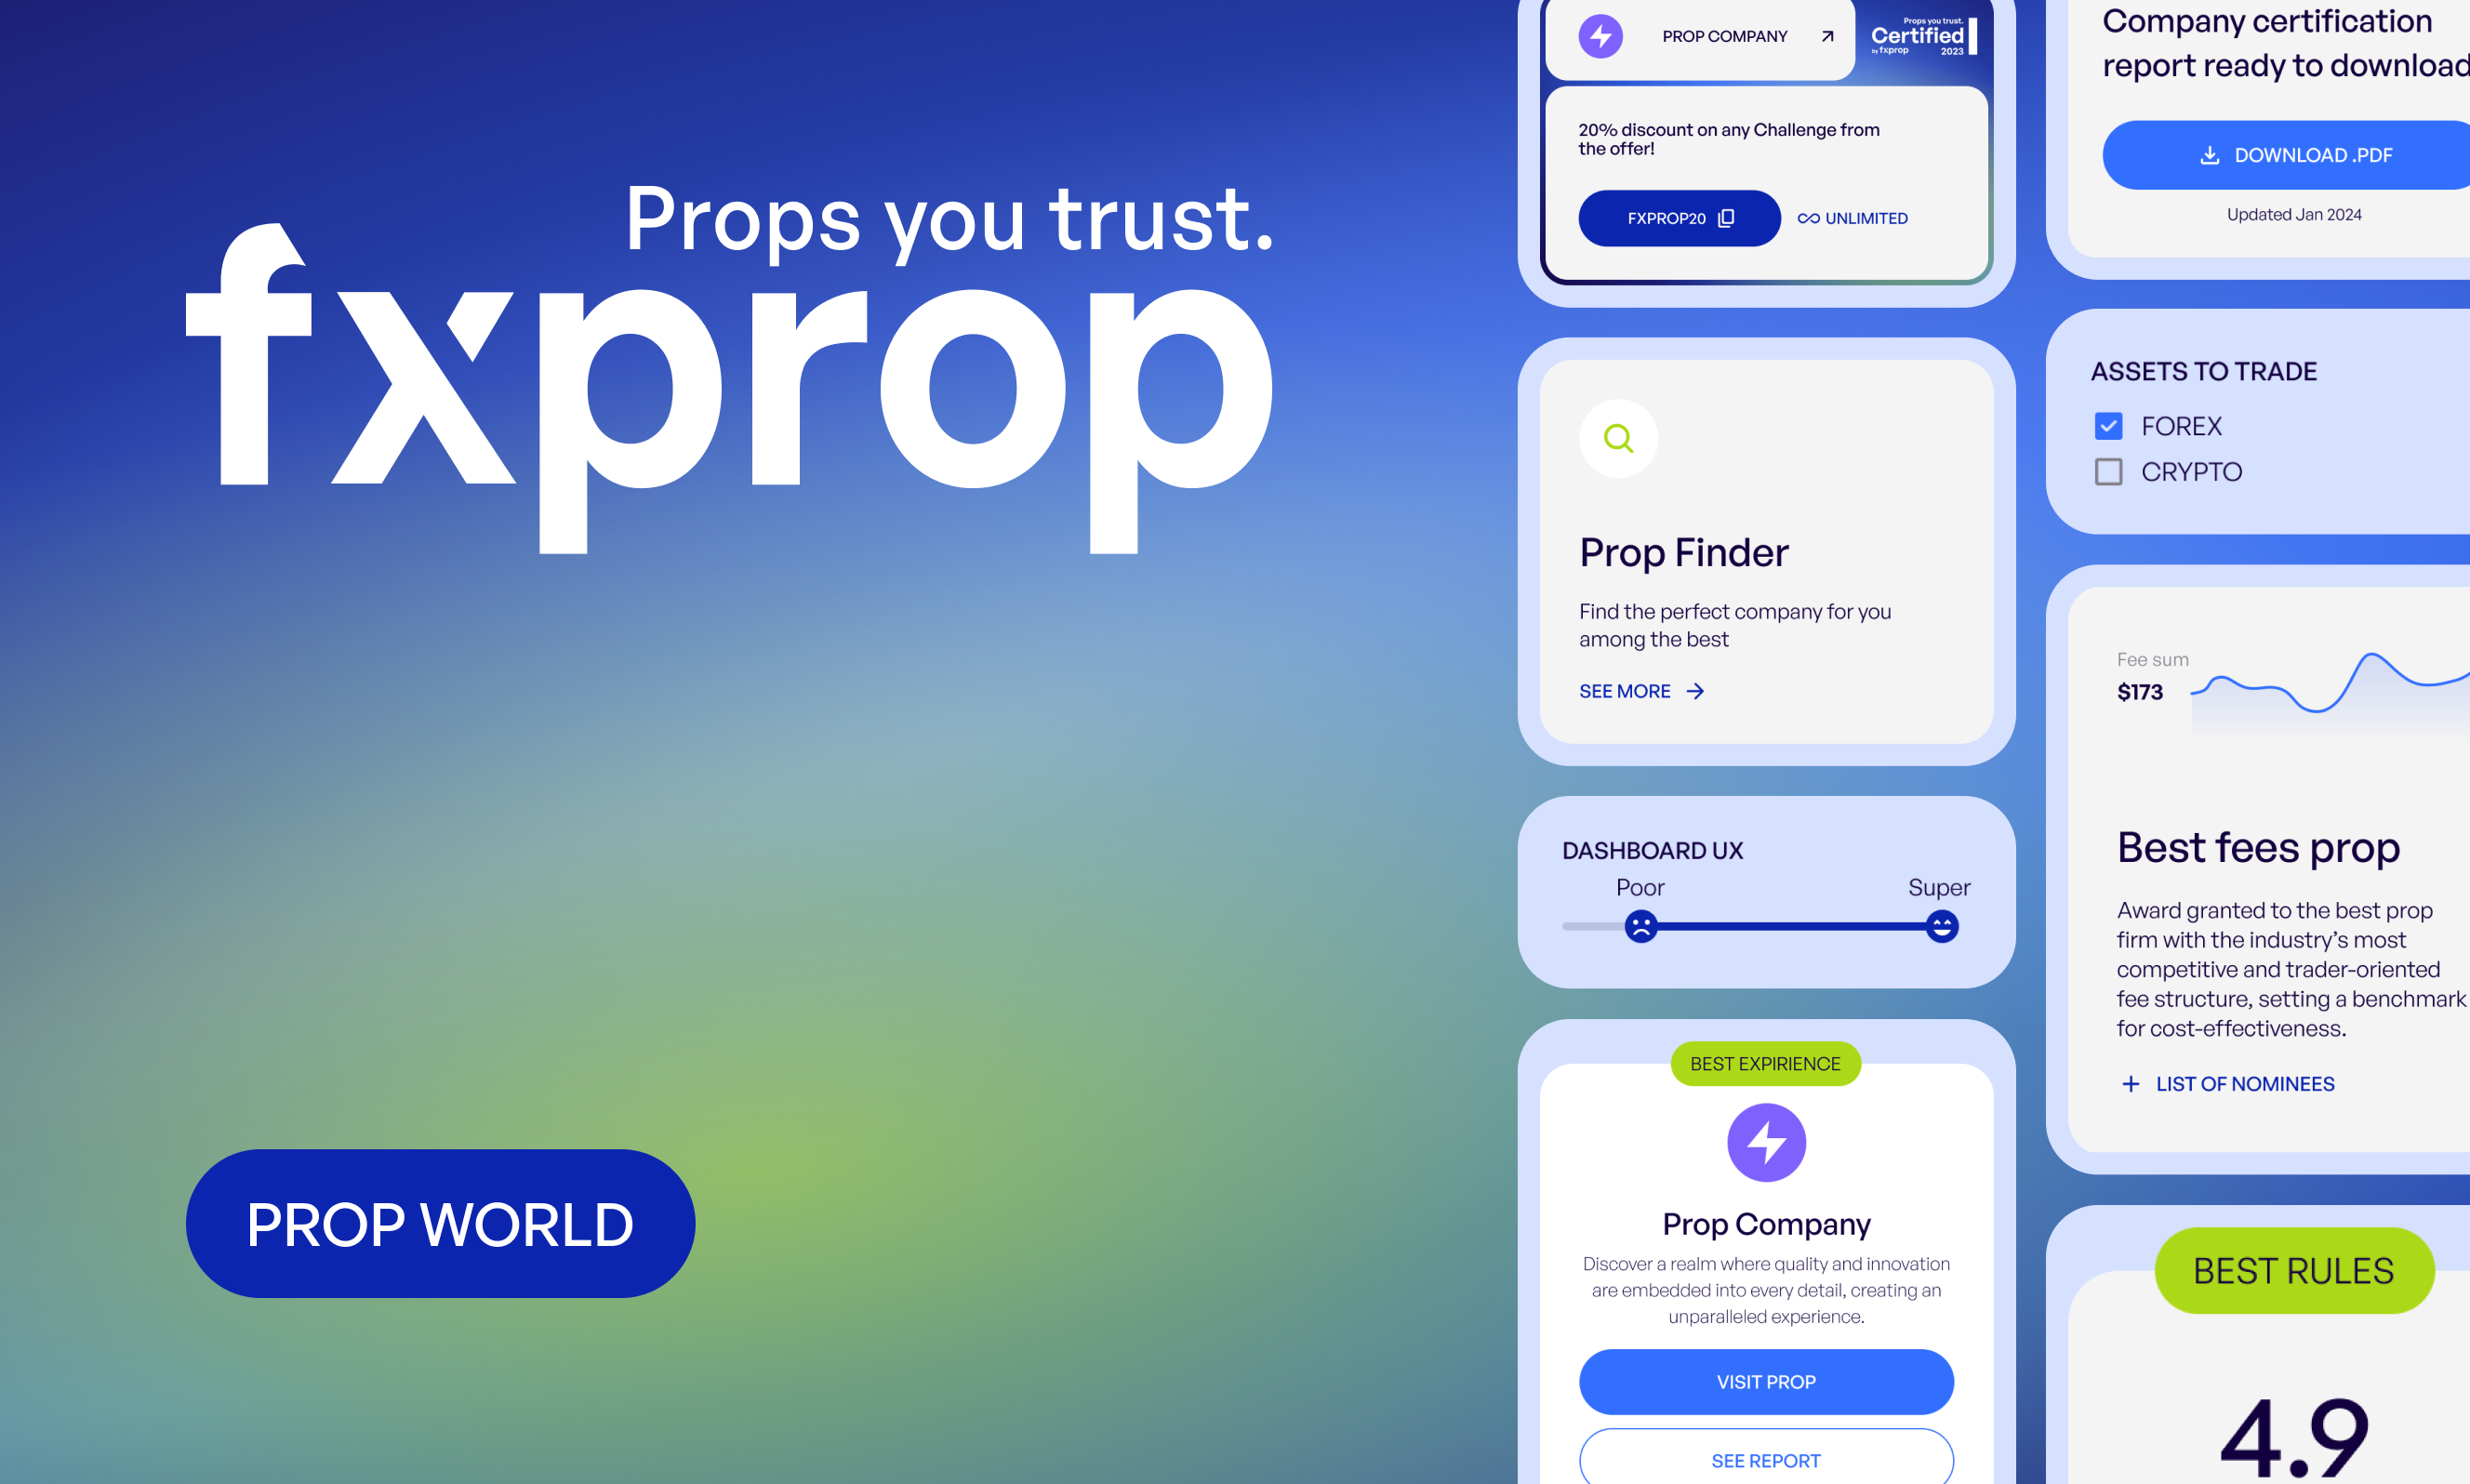 Start Your Career in Prop Trading with fxprop